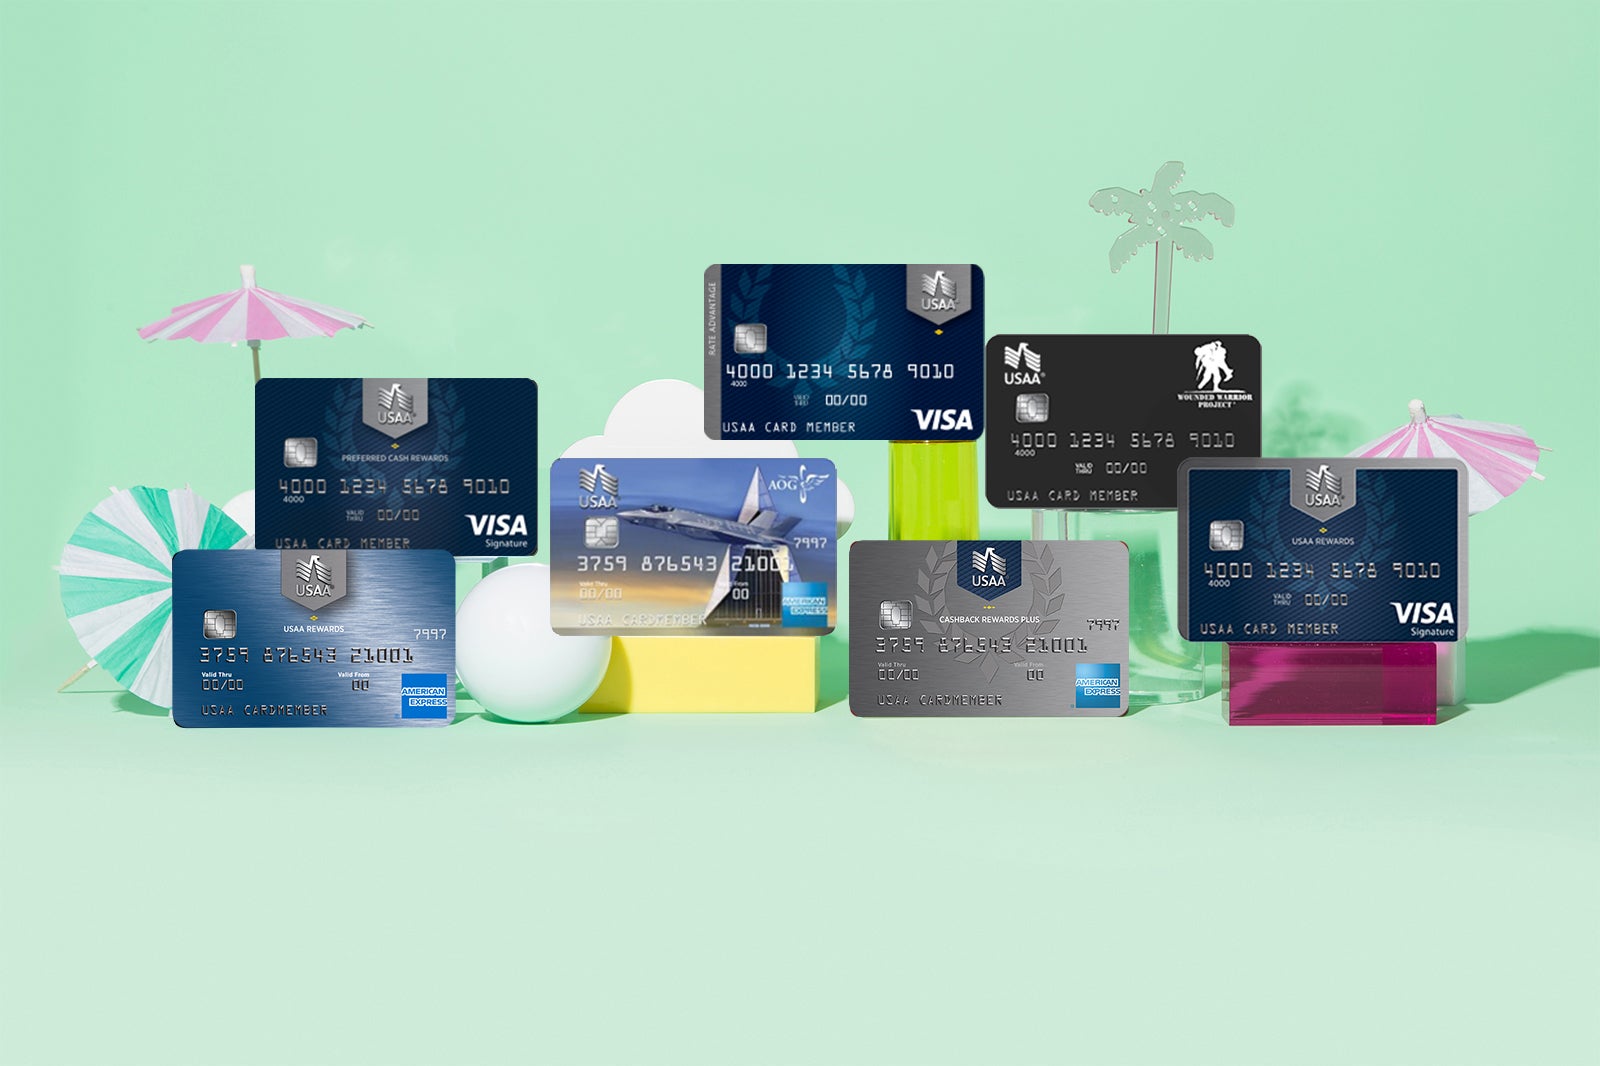 usaa-credit-cards-best-and-worst-the-points-guy